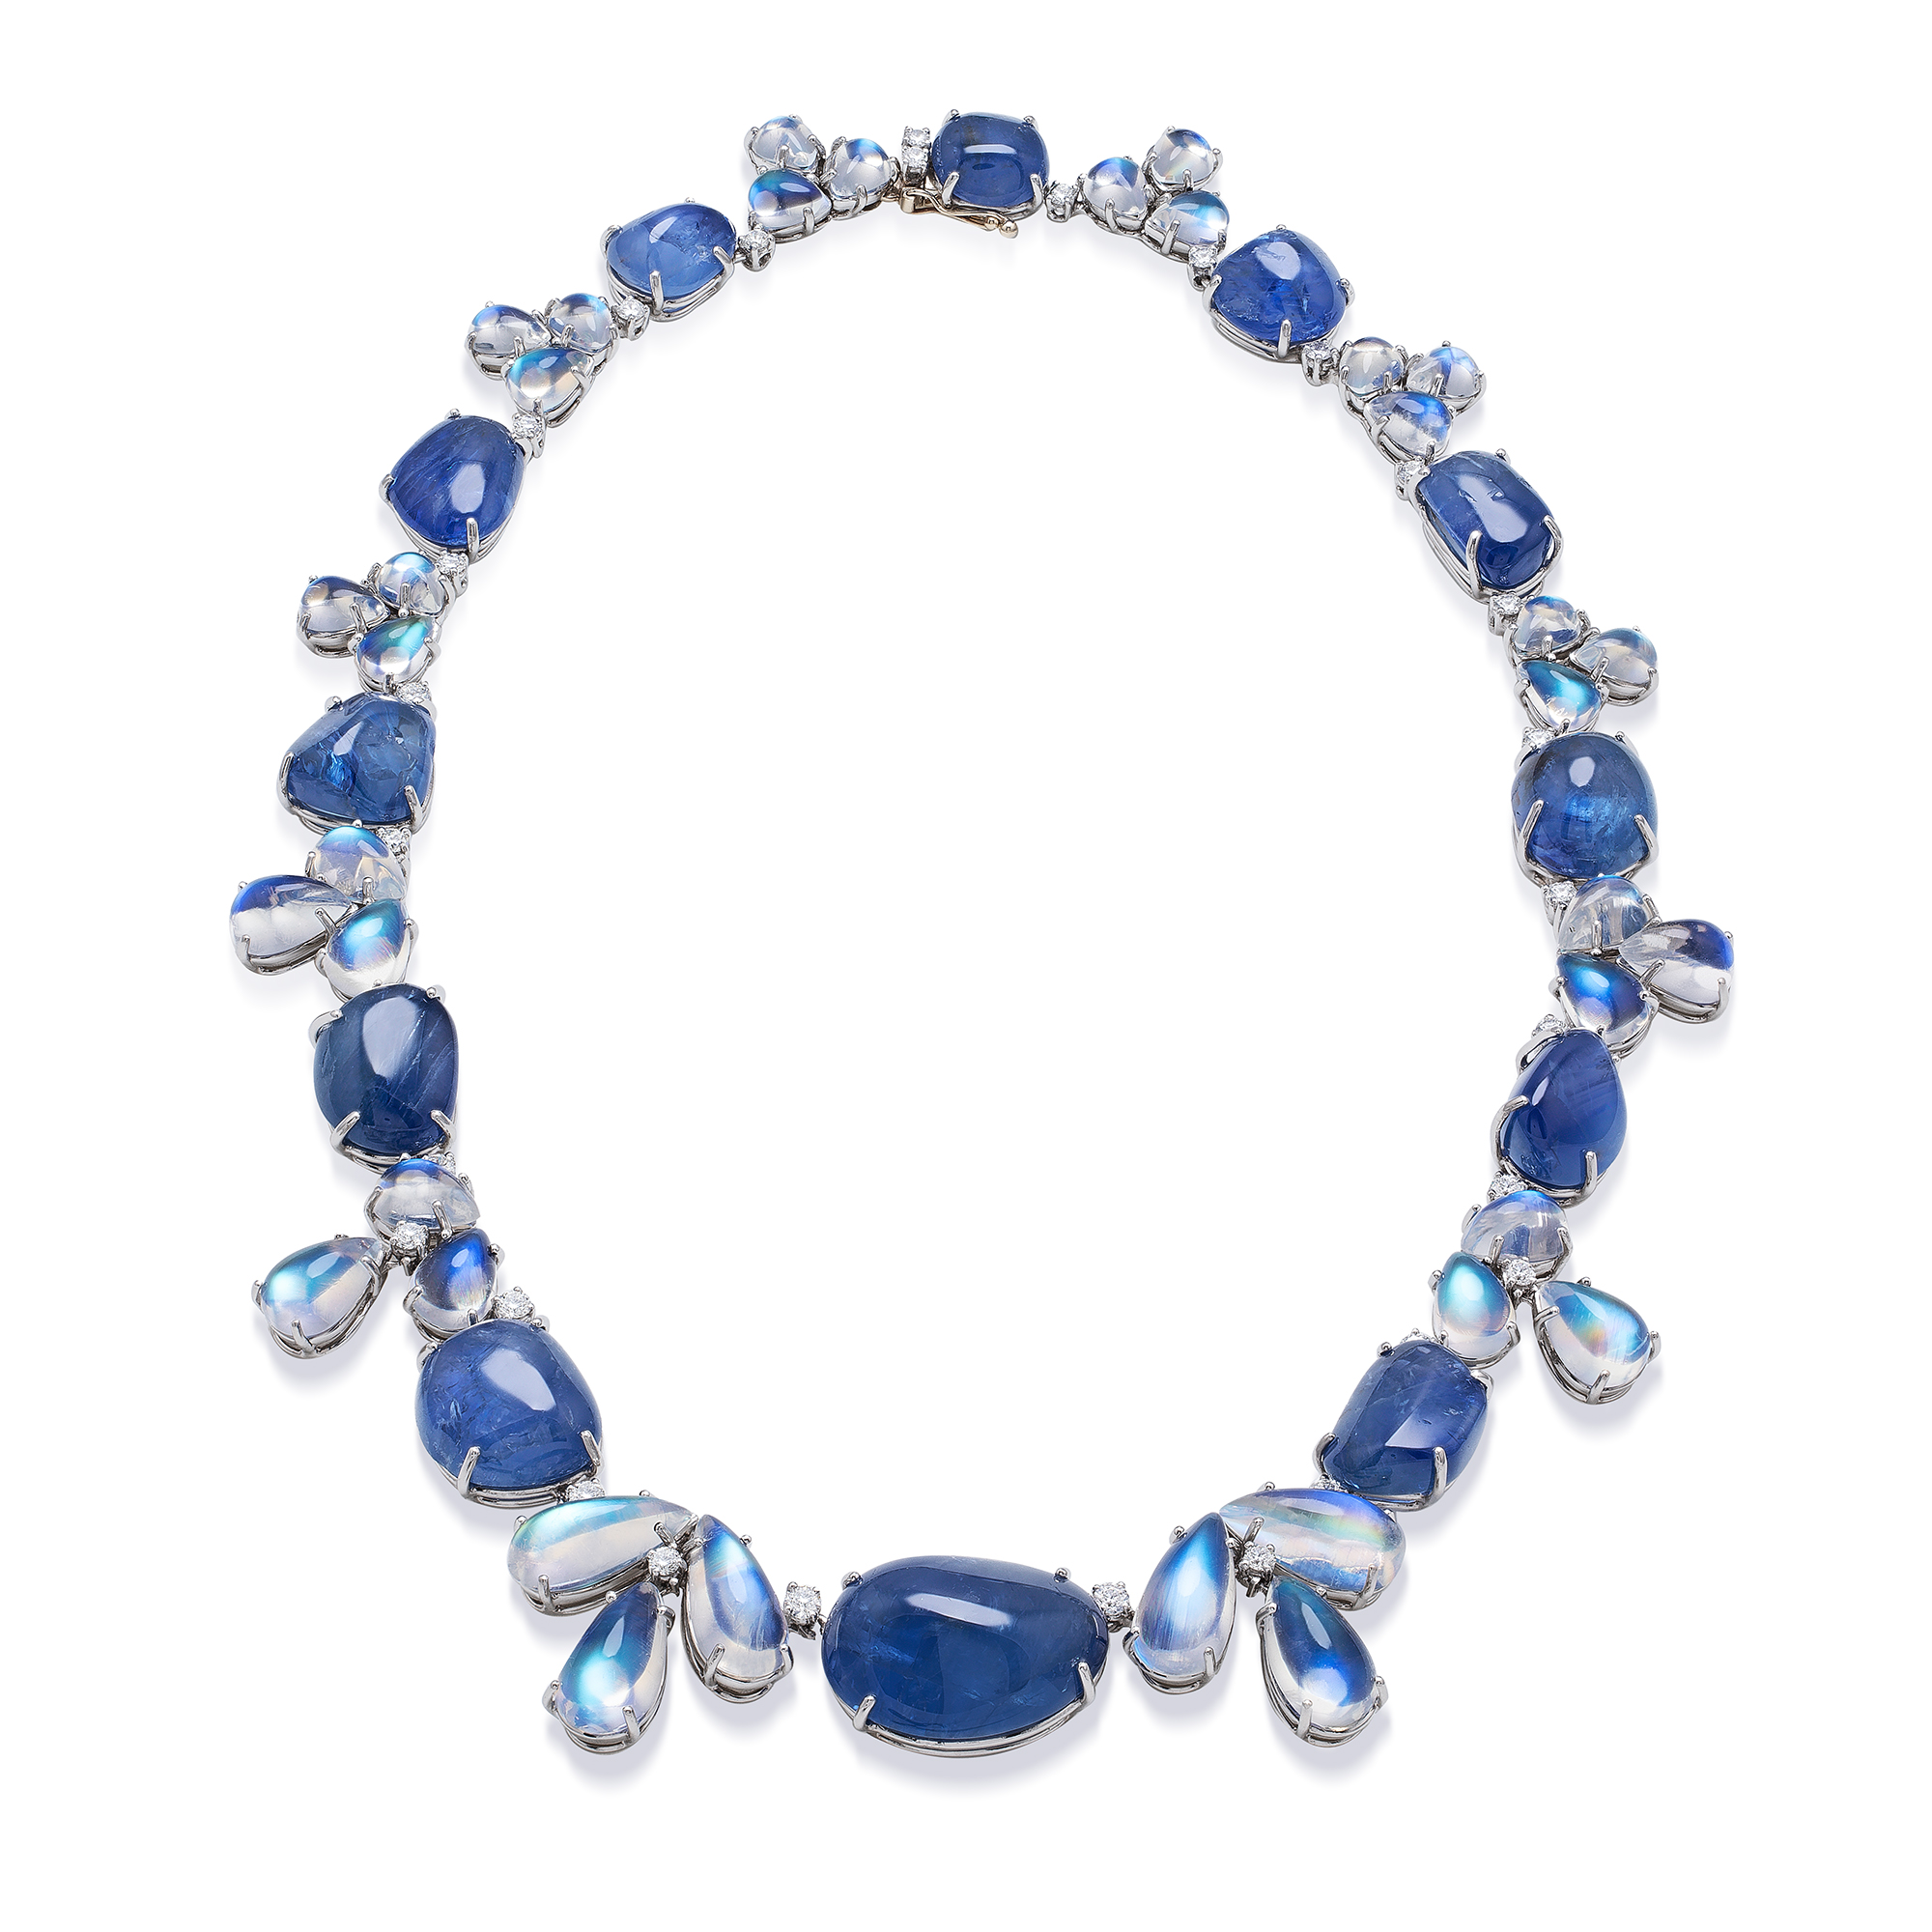 Platinum Necklace with Moonstones, Sapphires and Diamonds